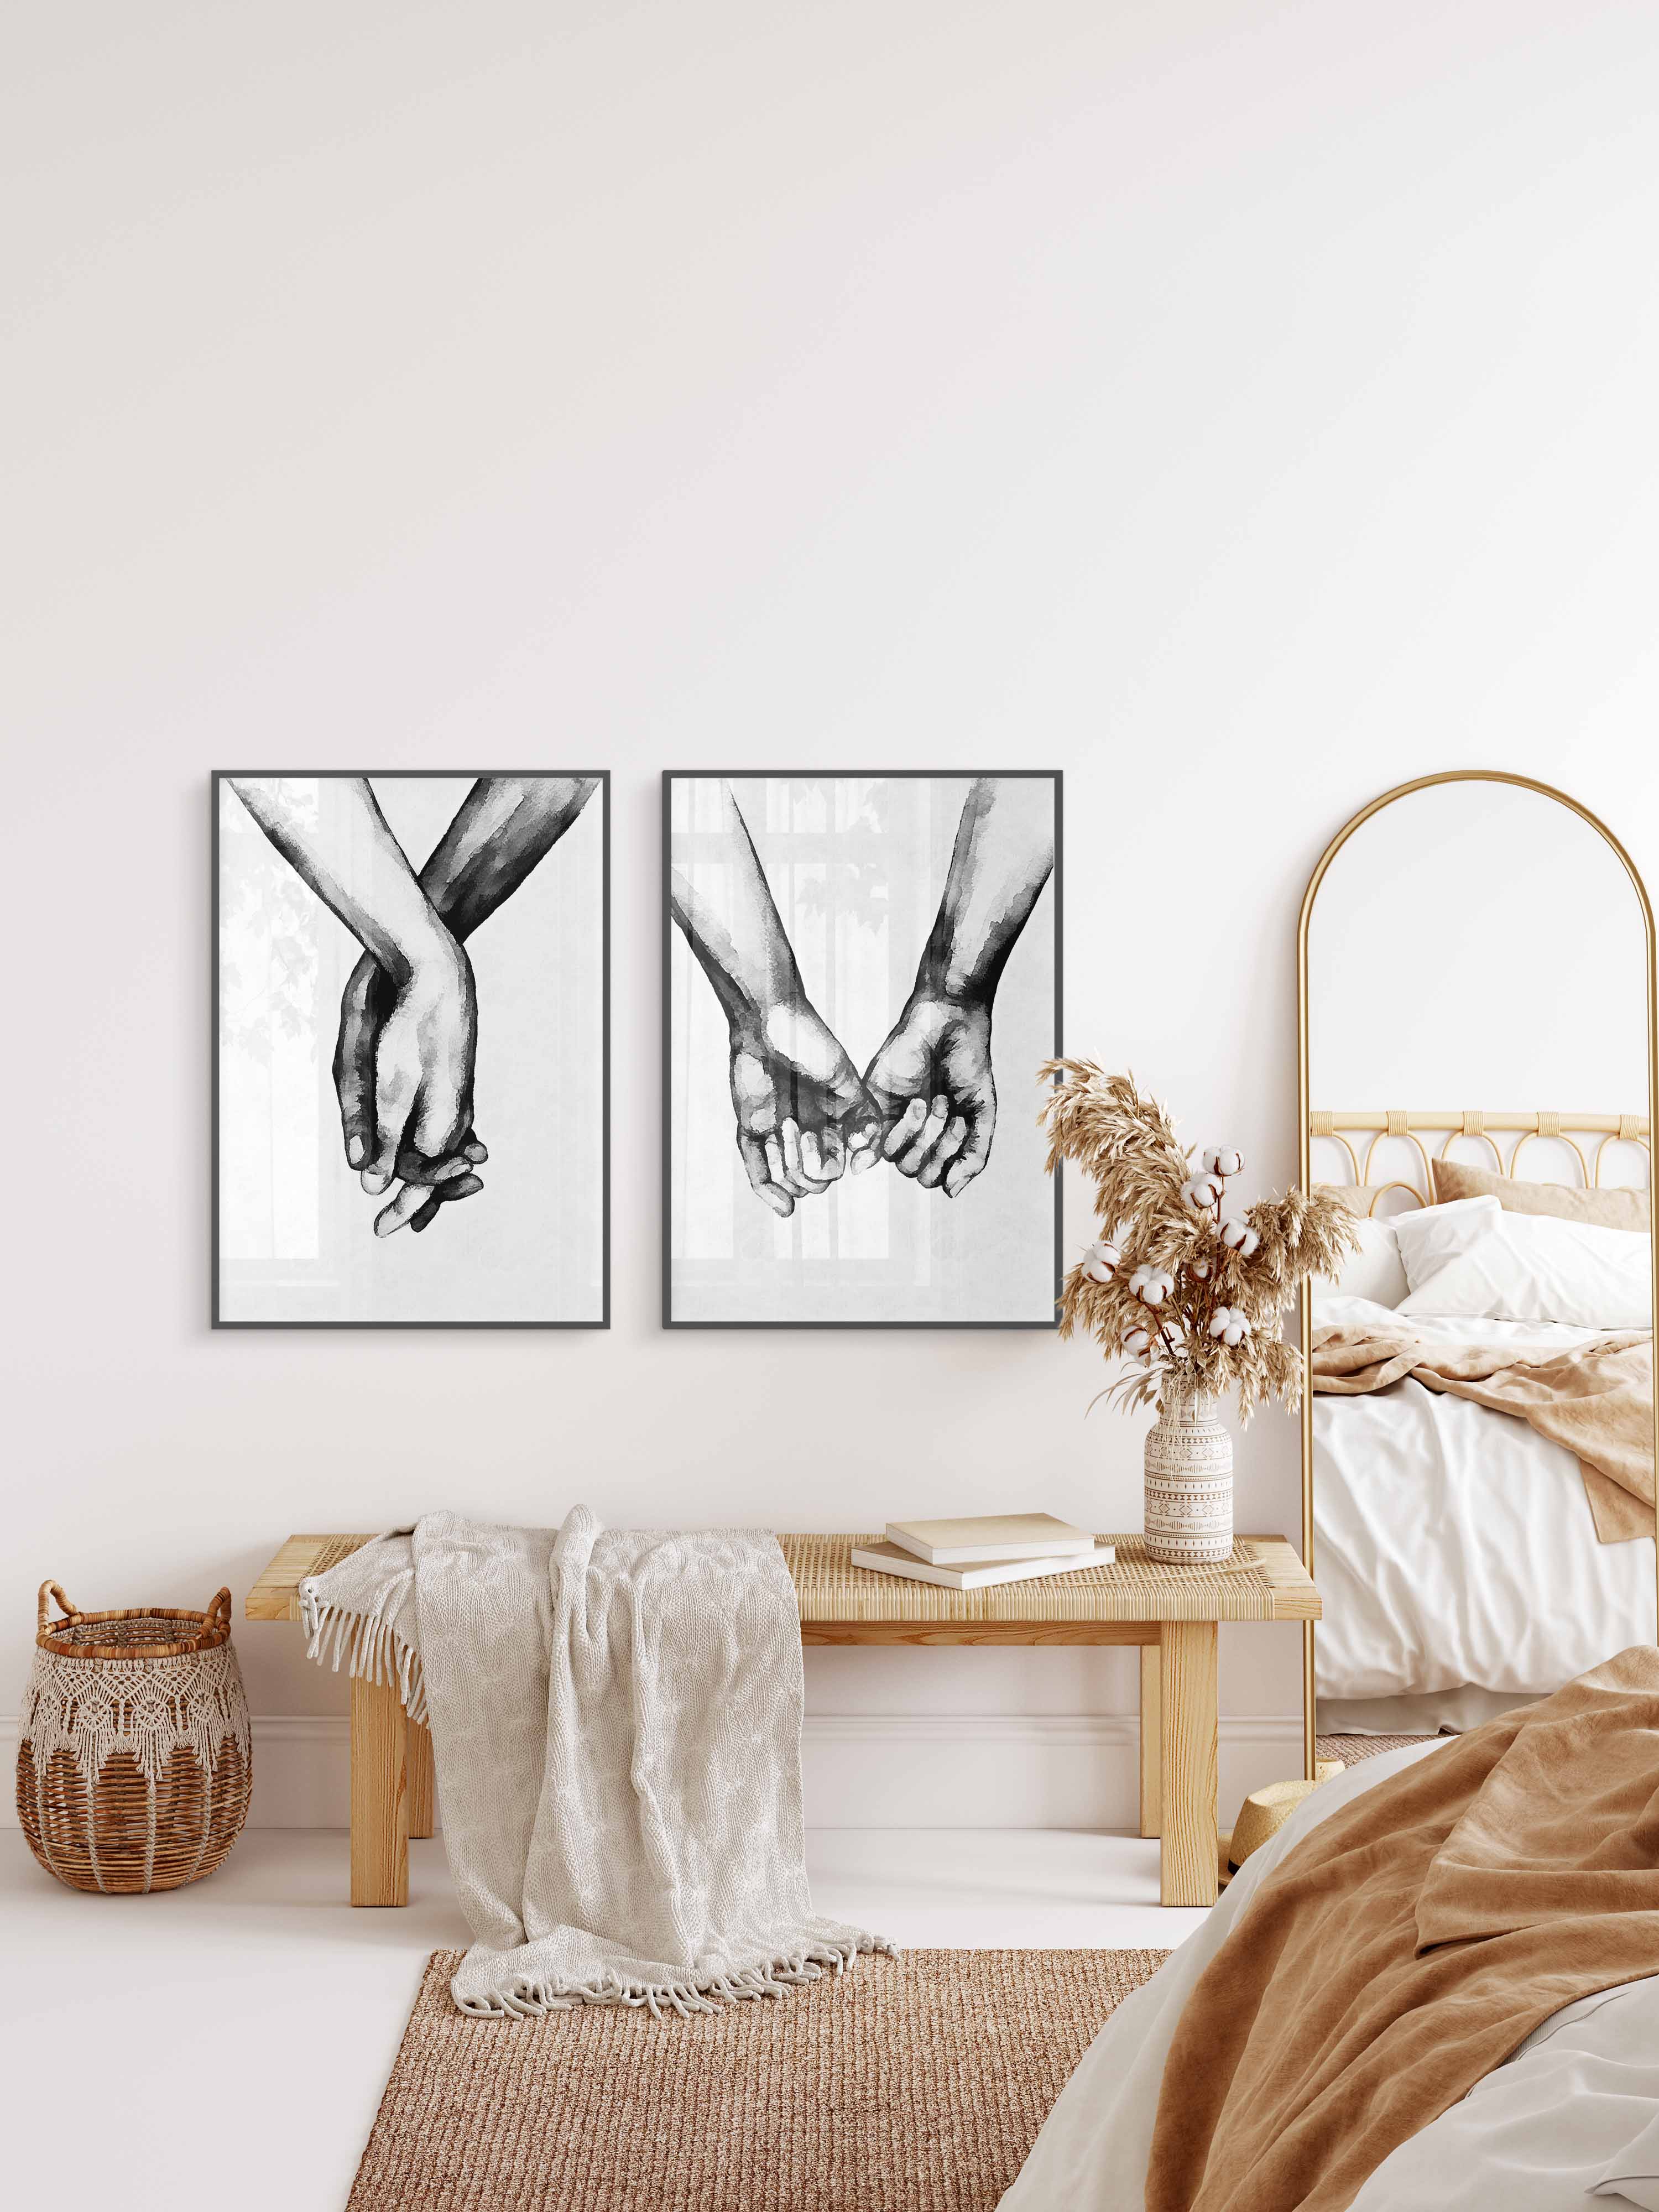 Illustration poster of two hands holding each other. White textured background.